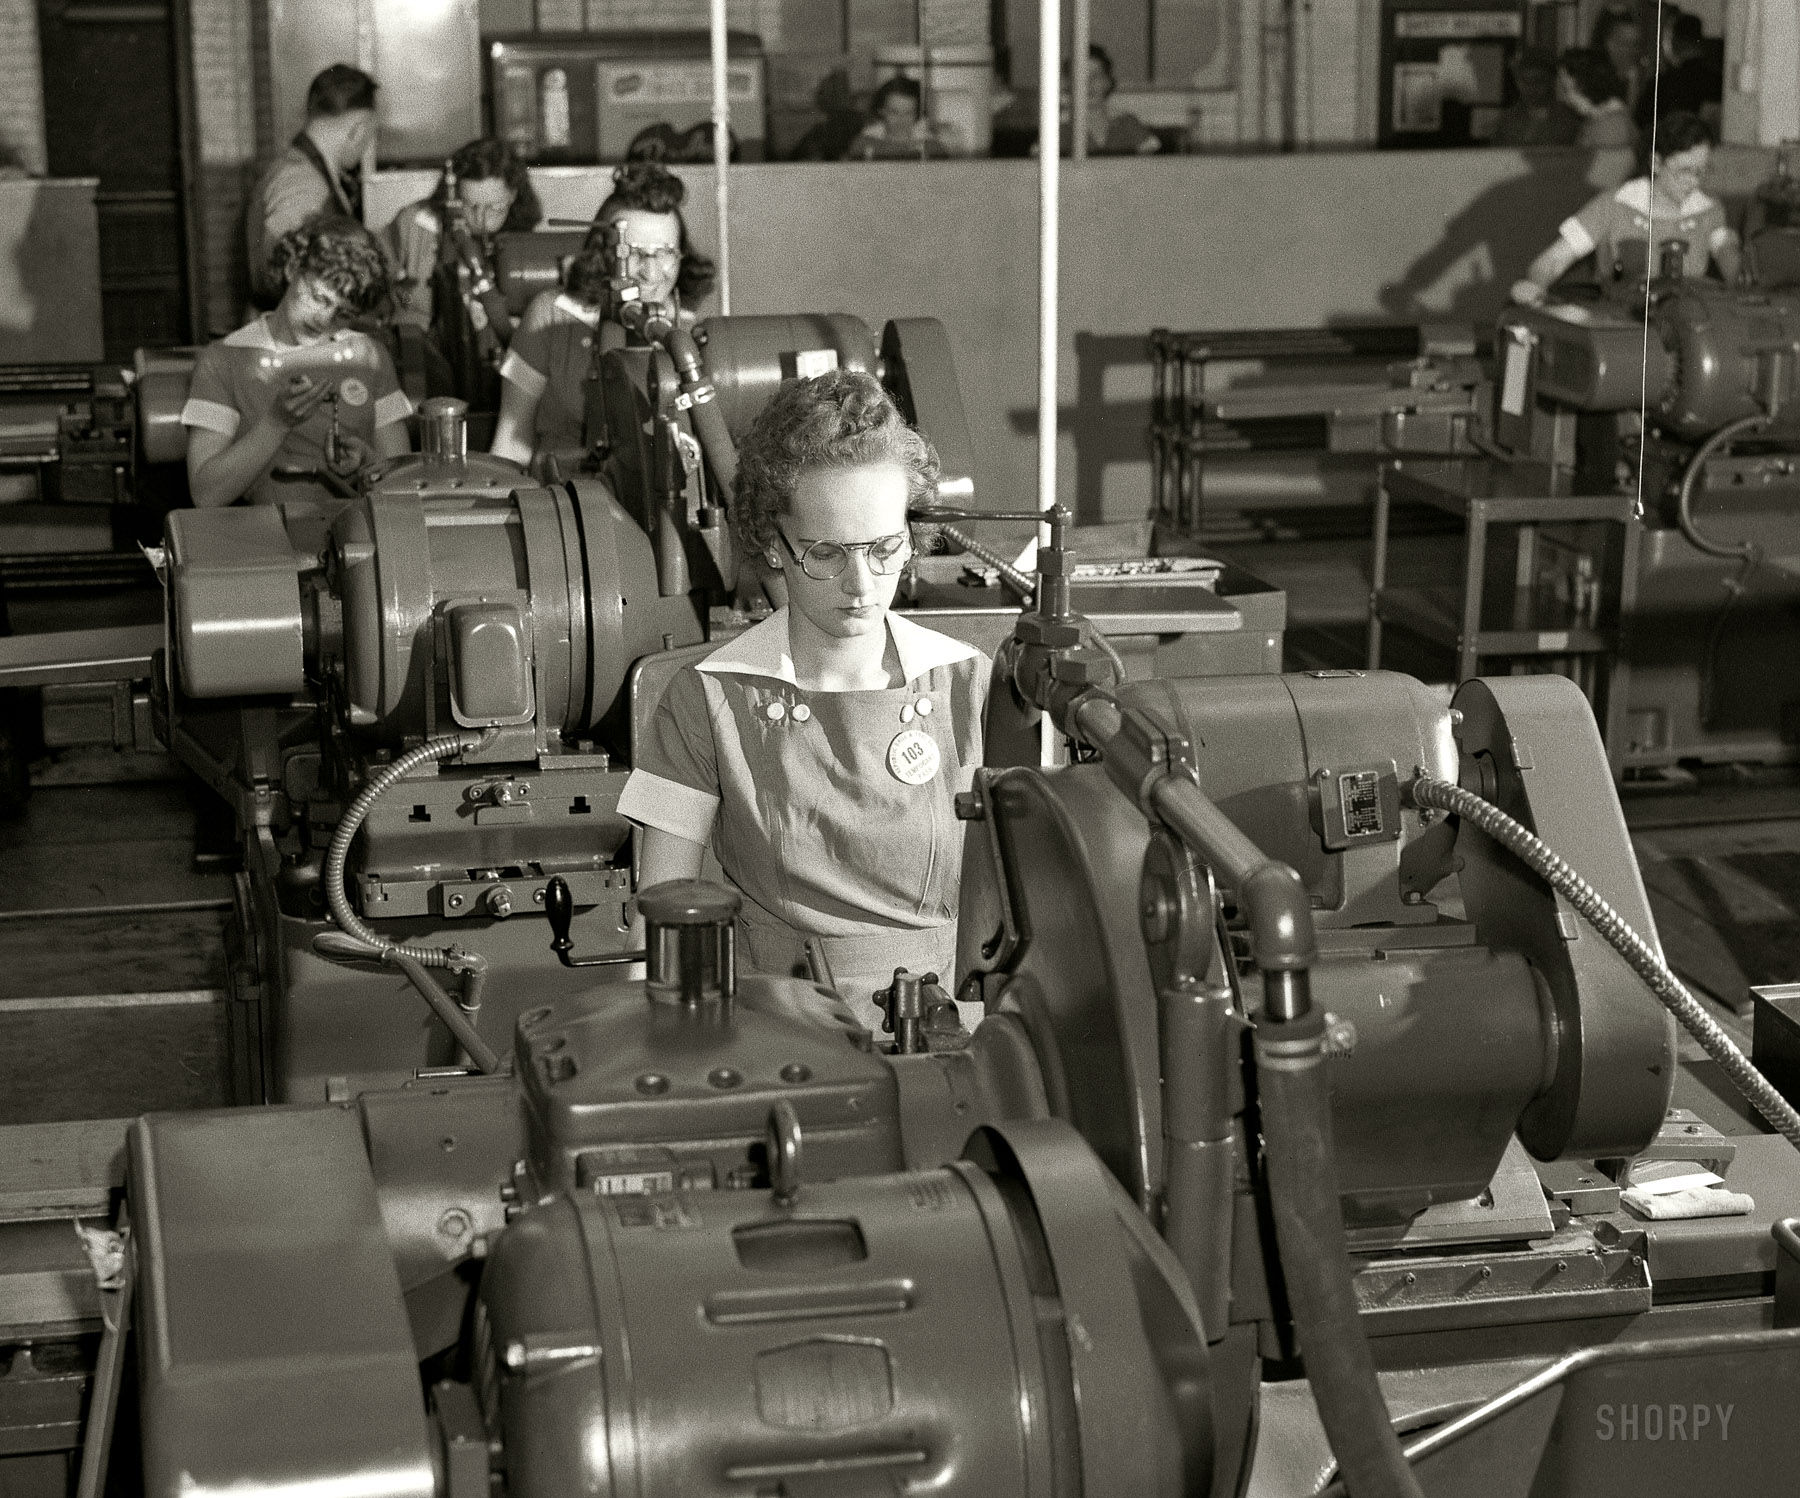 August 1942. "Women at work for victory. Republic Drill and Tool Company, Chicago. These young employees of a Midwest drill and tool plant are operating cylindrical grinders which taper drills to specified size. Used in the manufacture of guns, ships and tanks, these drills demand precise and accurate grinding." Medium format negative by Ann Rosener, Office of War Information. View full size.